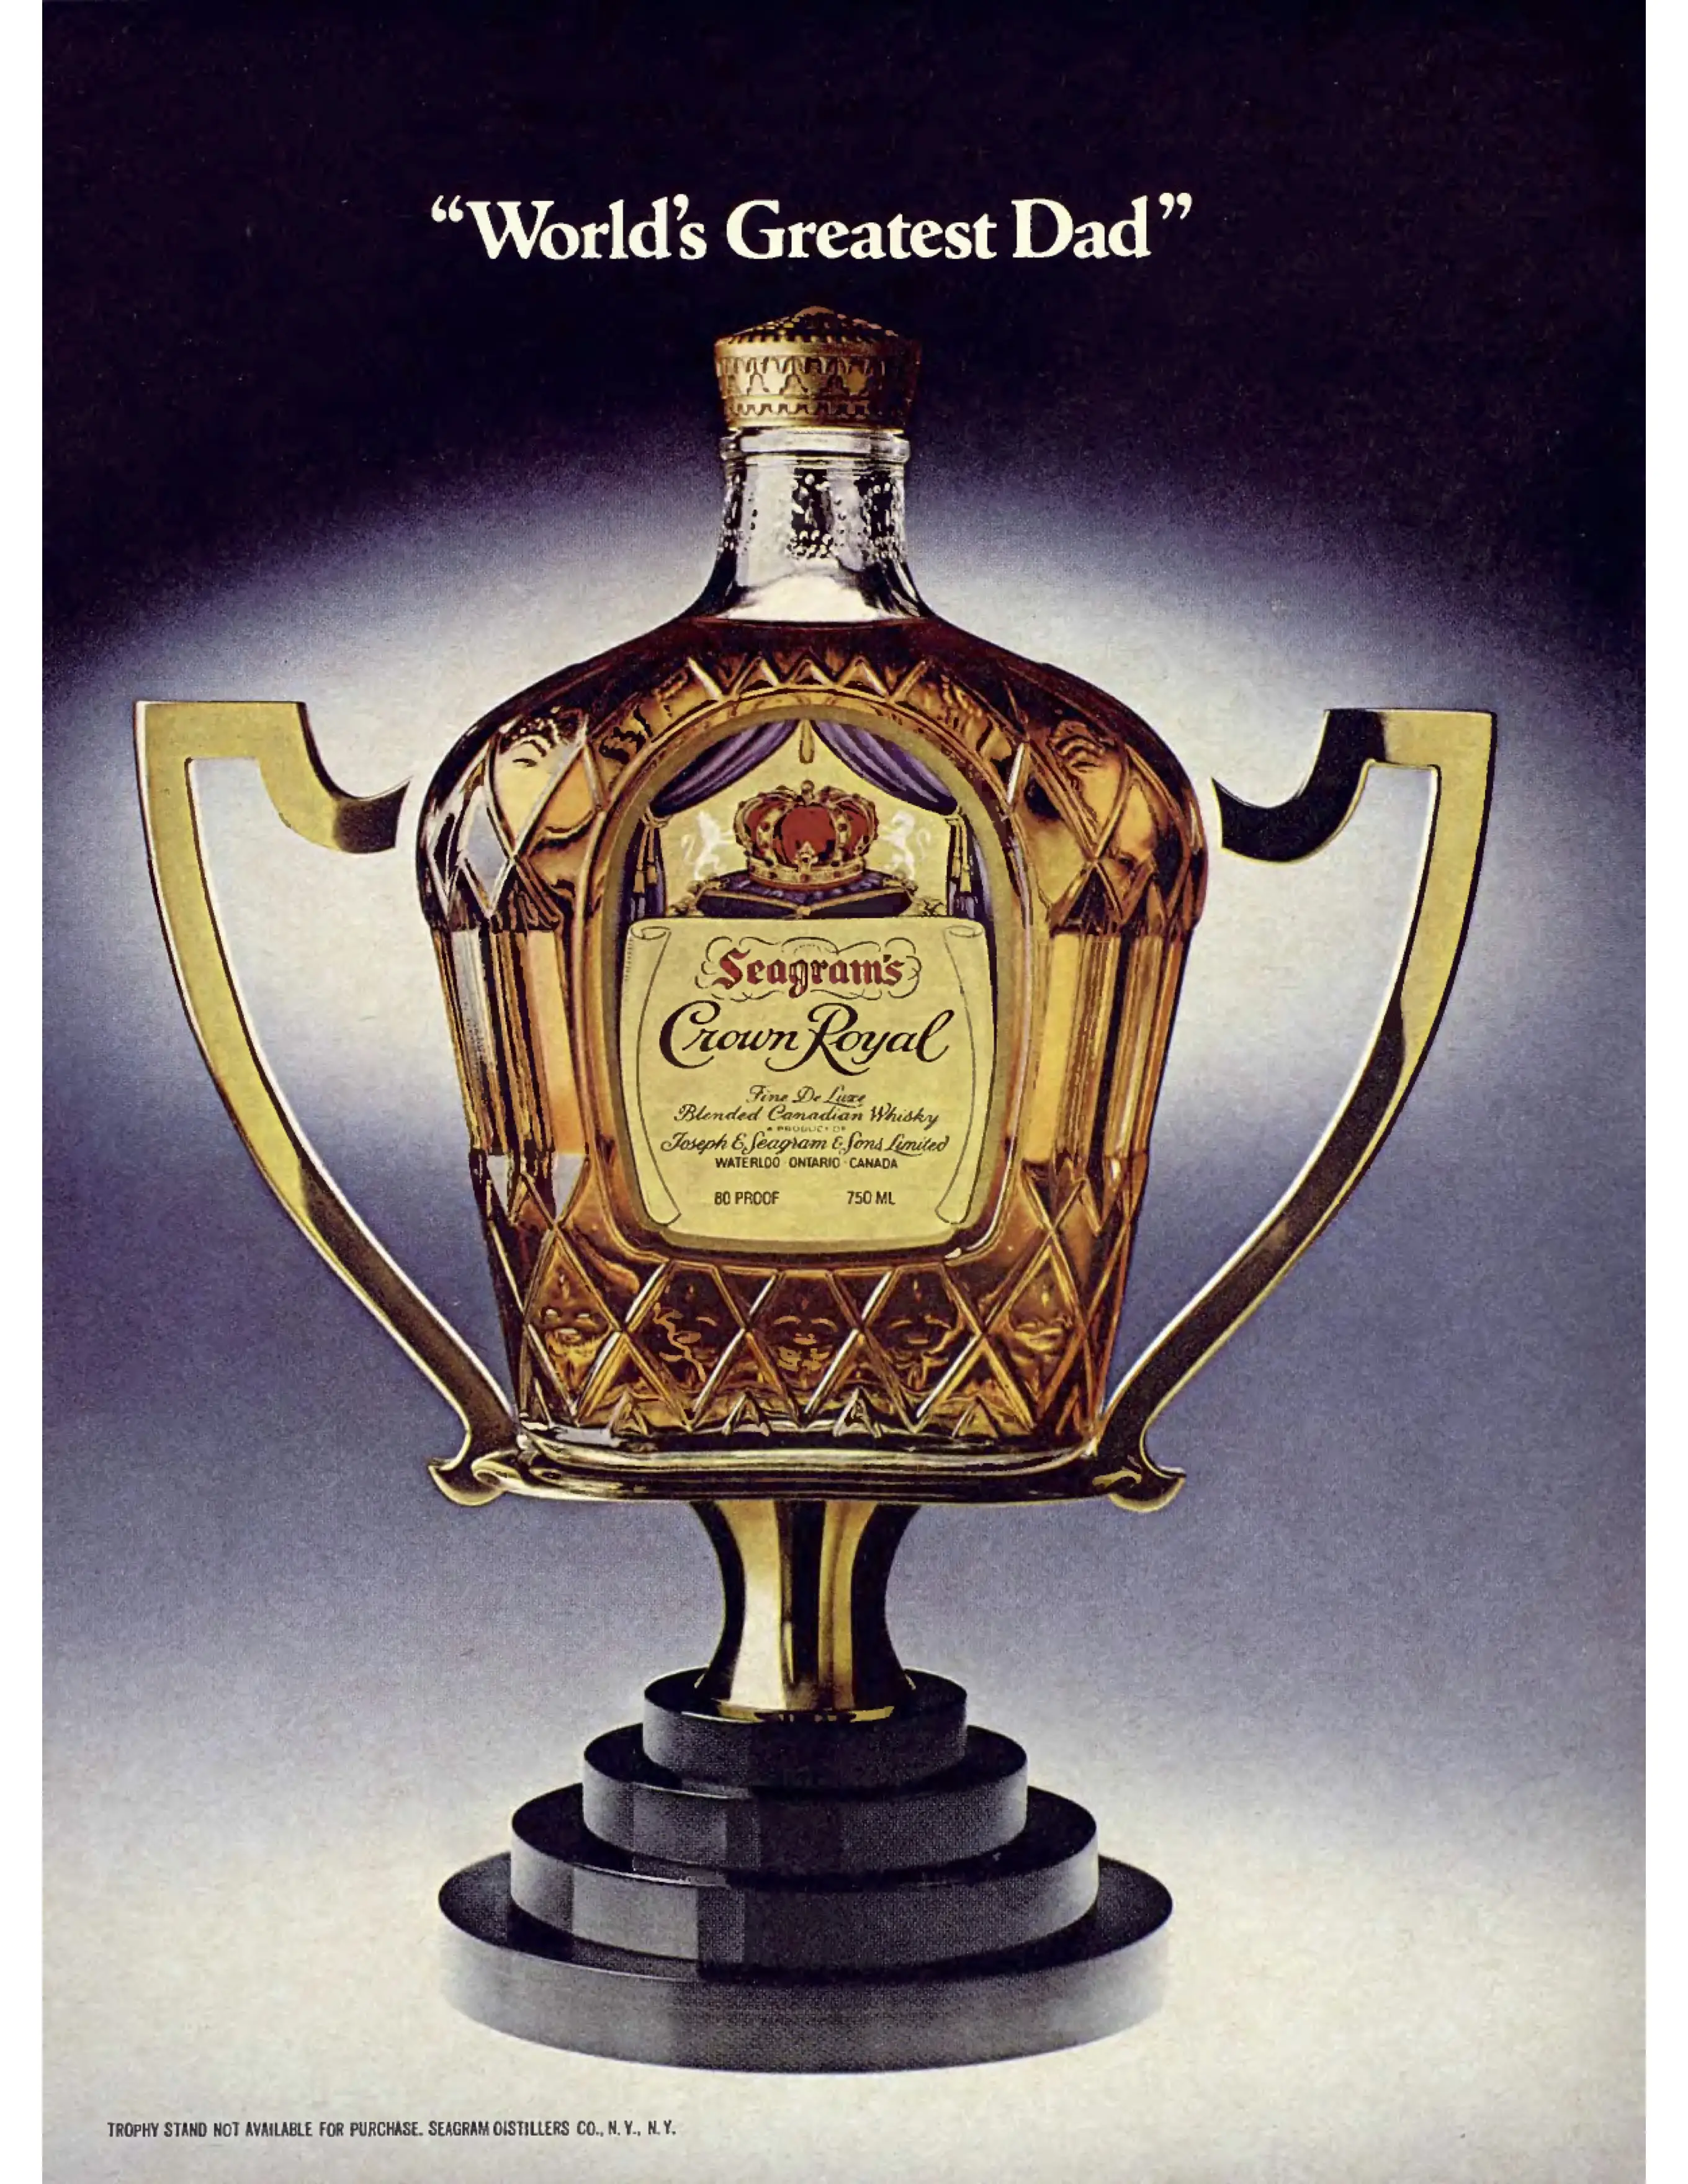 Playboy Magazine's Iconic Alcohol Advertising in the 1980s